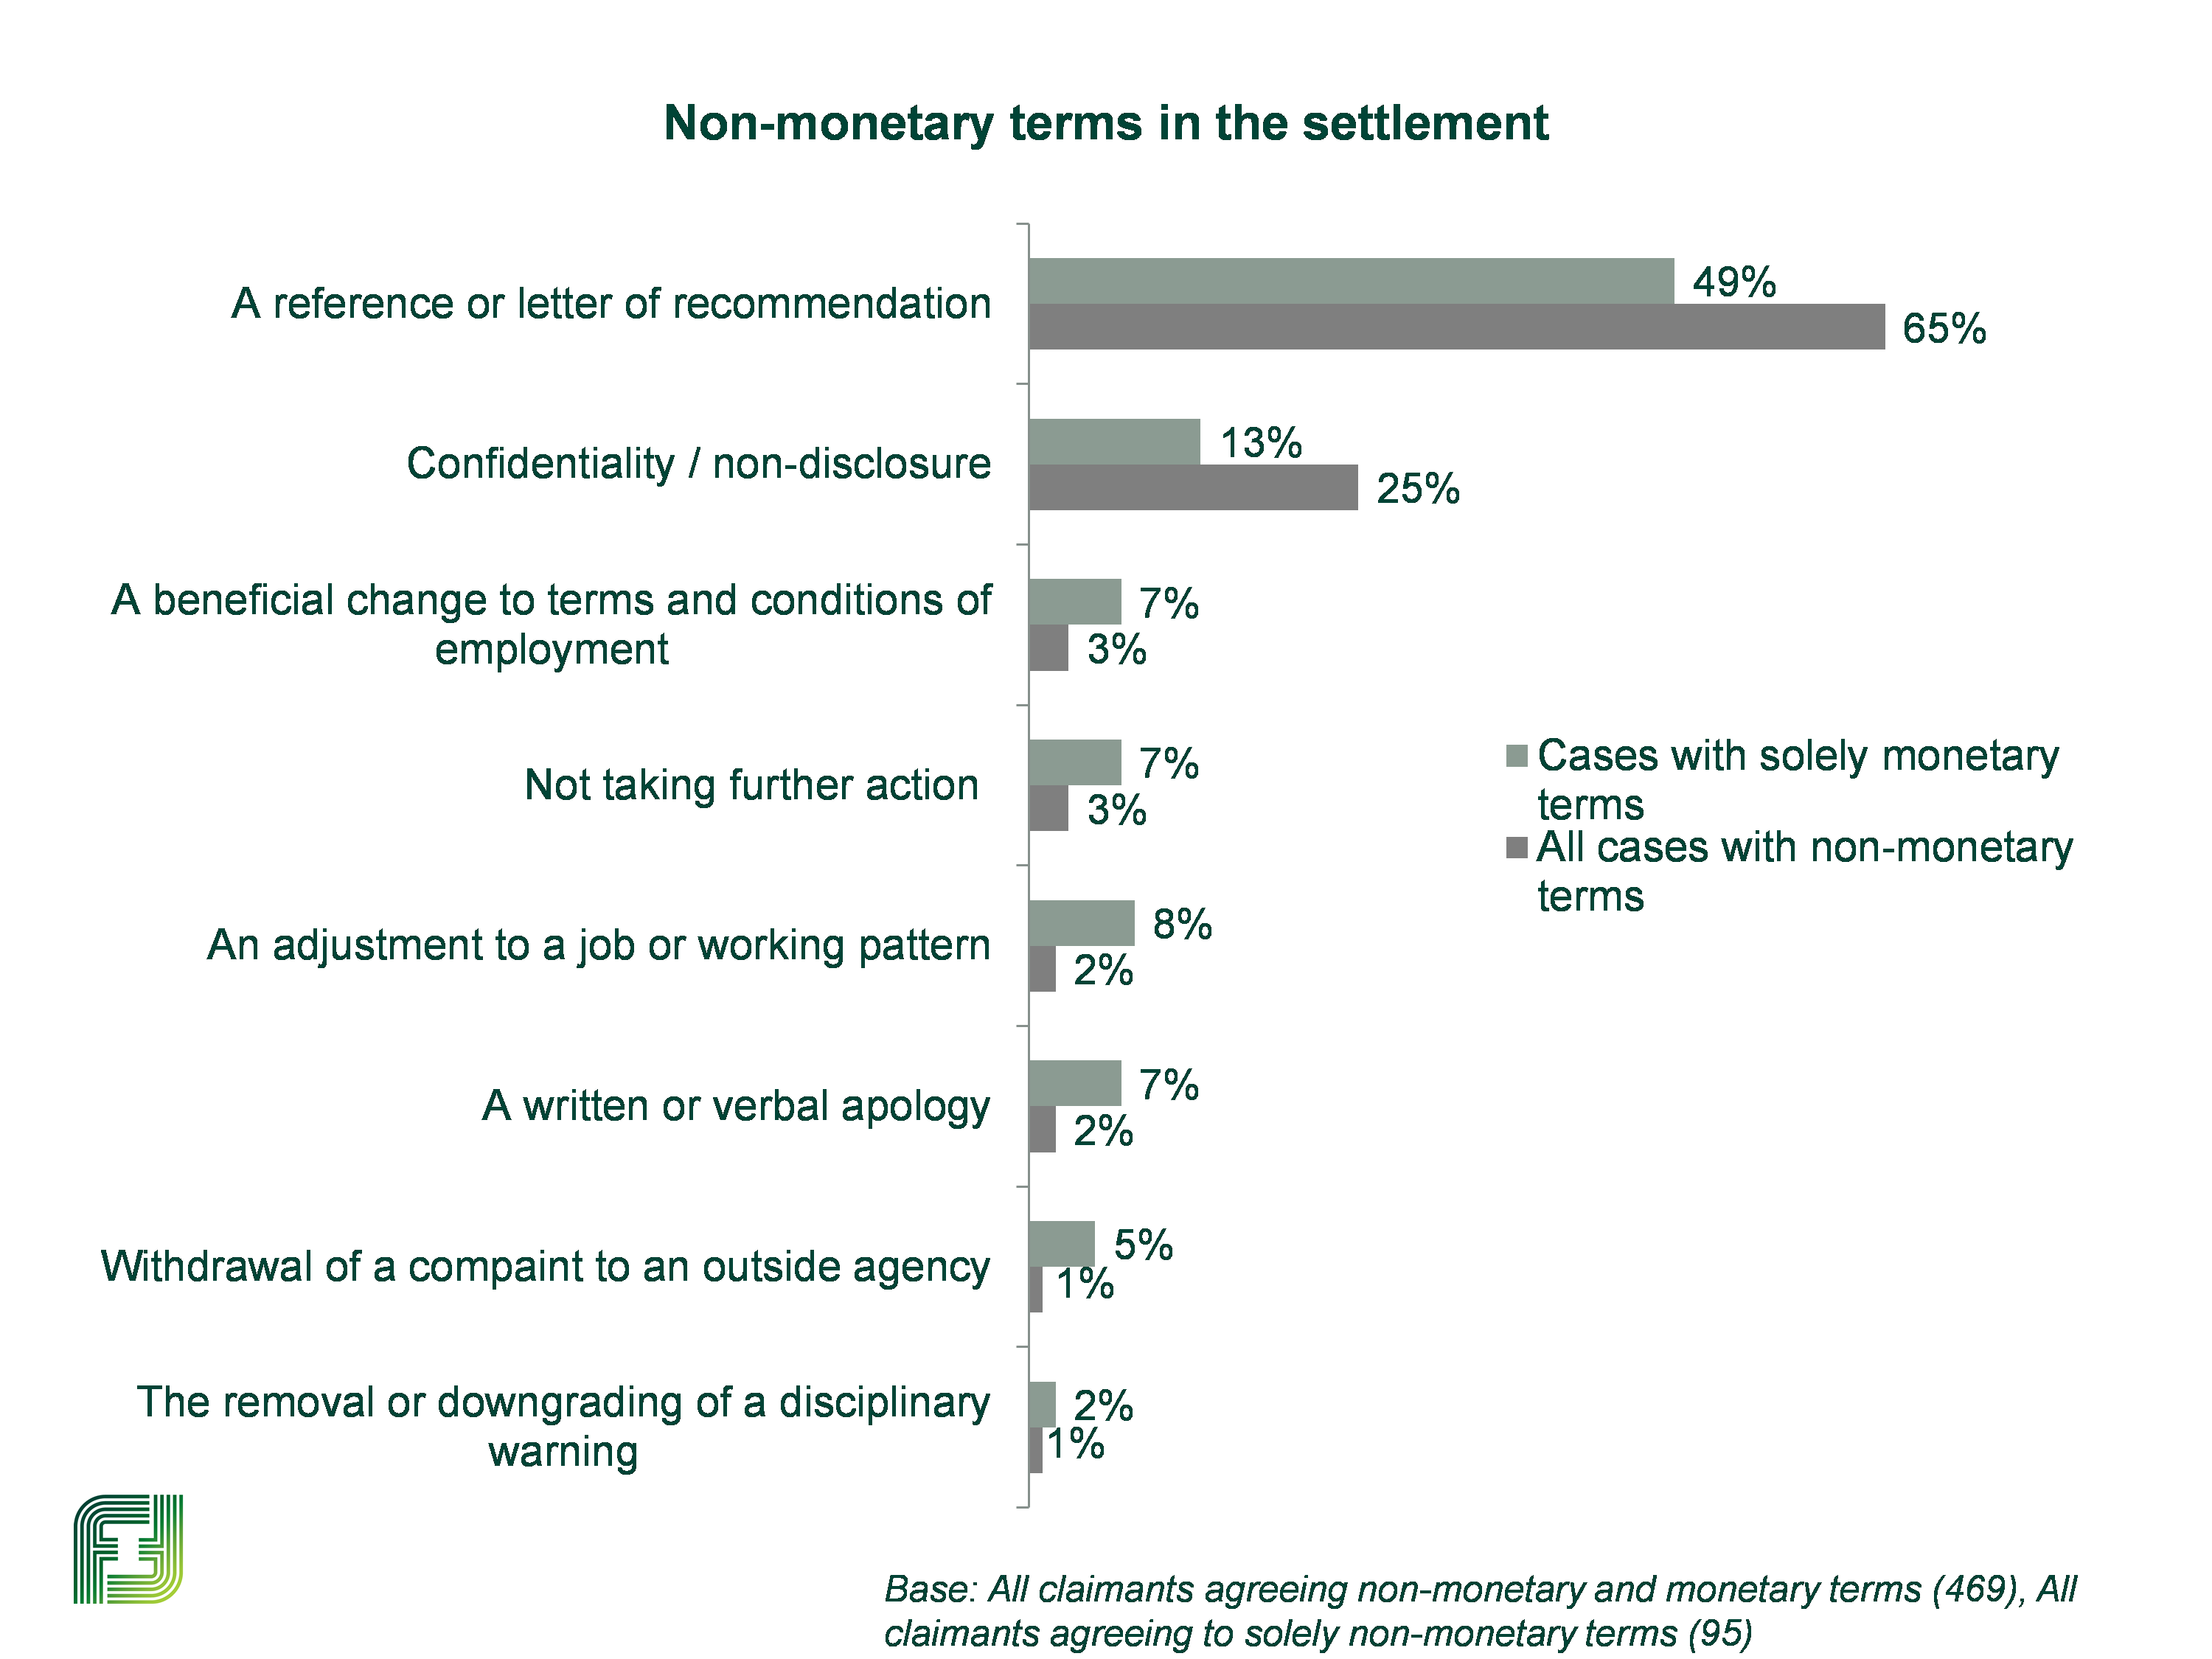 Figure 4.2: Non-monetary terms or conditions in the settlement